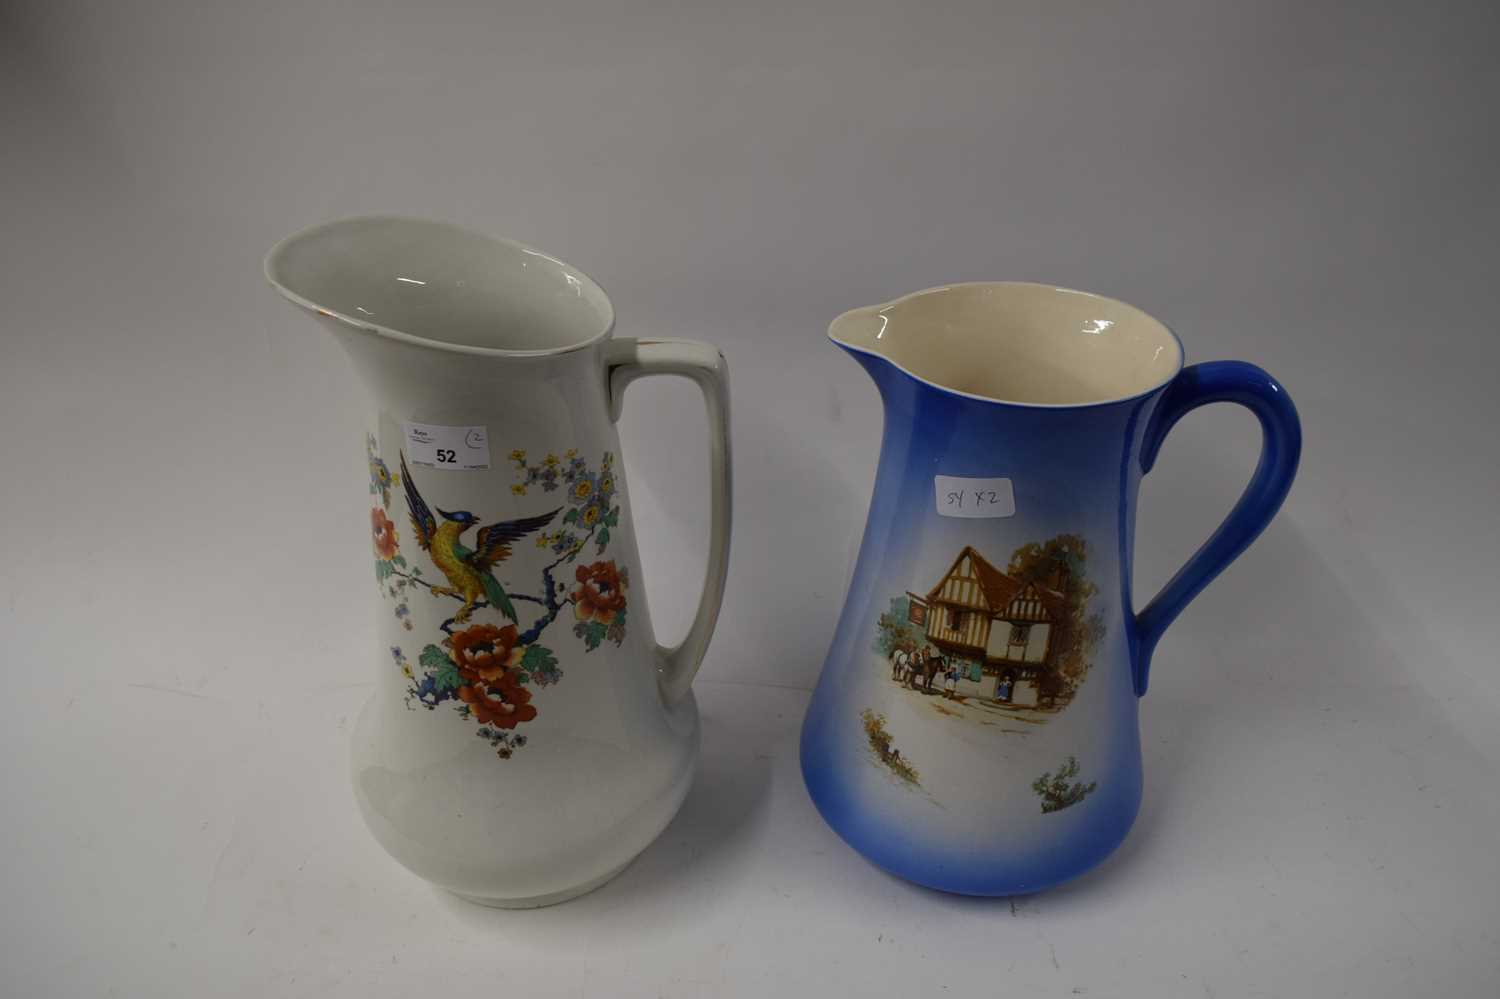 Lot 52 - TWO DECORATED WASH JUGS